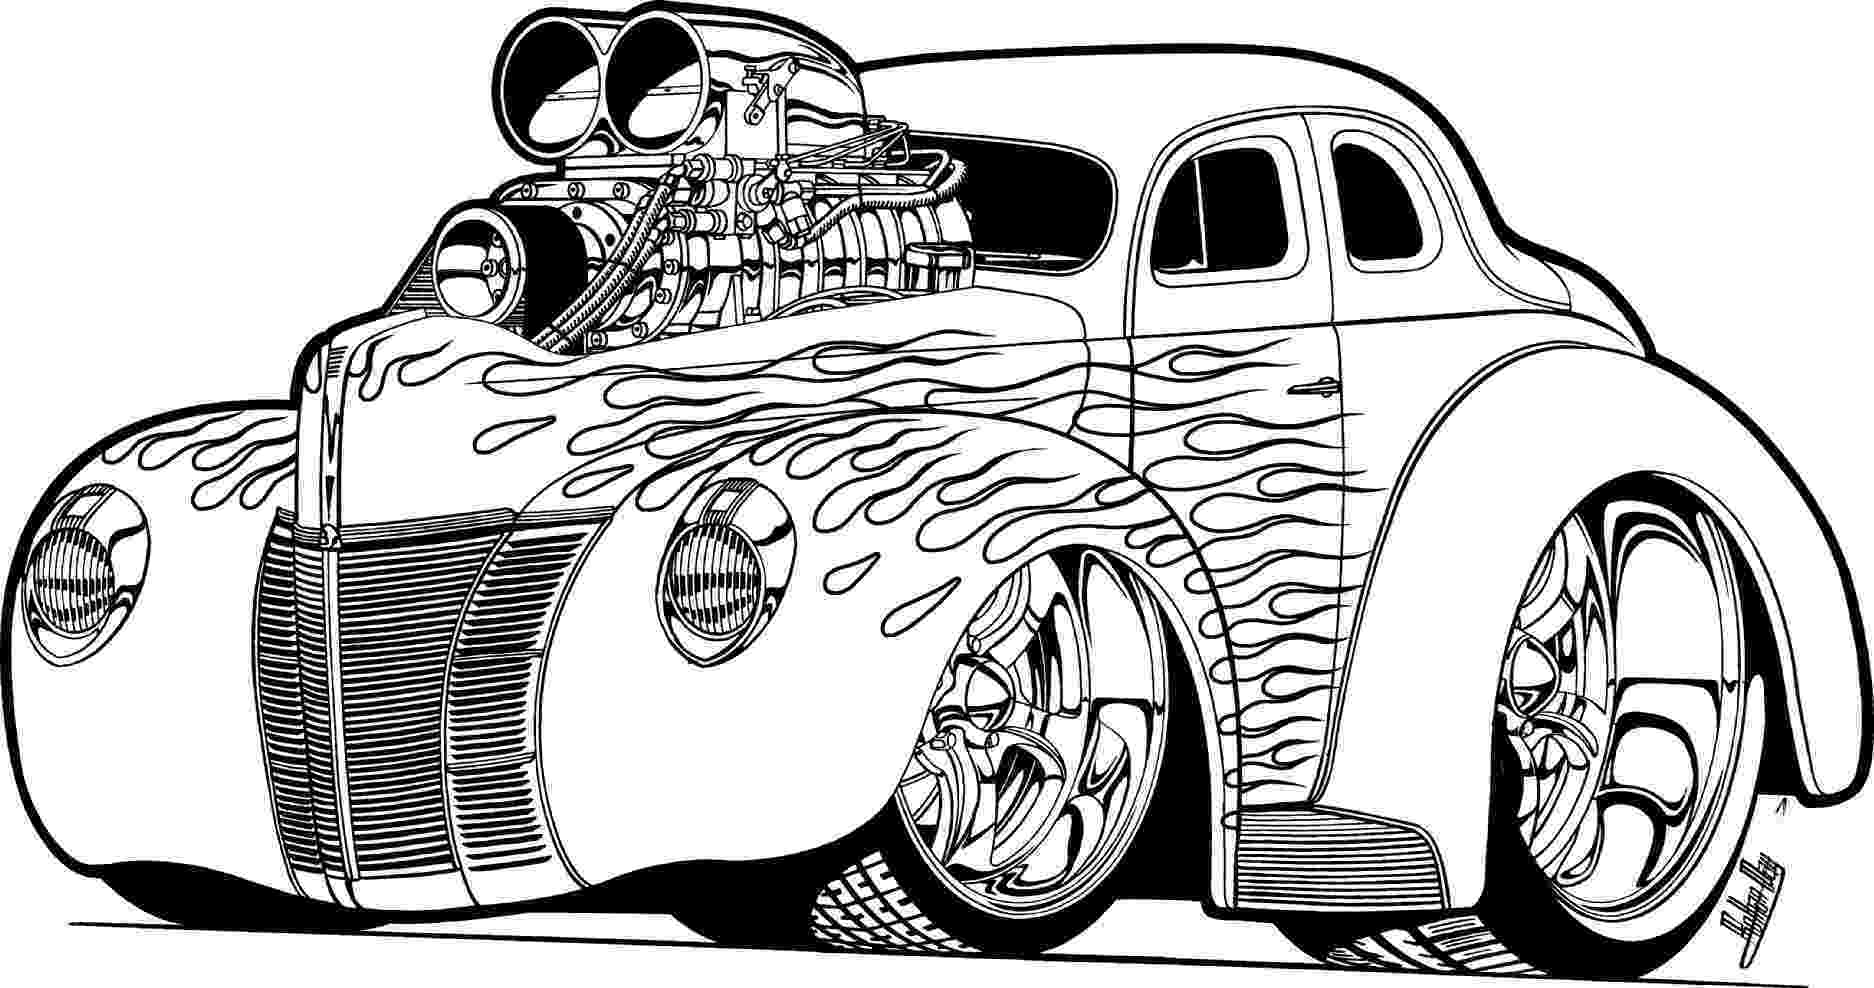 coloring pictures of cars and trucks pin by muriel wright on trucks ford trucks drawings trucks and coloring pictures of trucks cars 